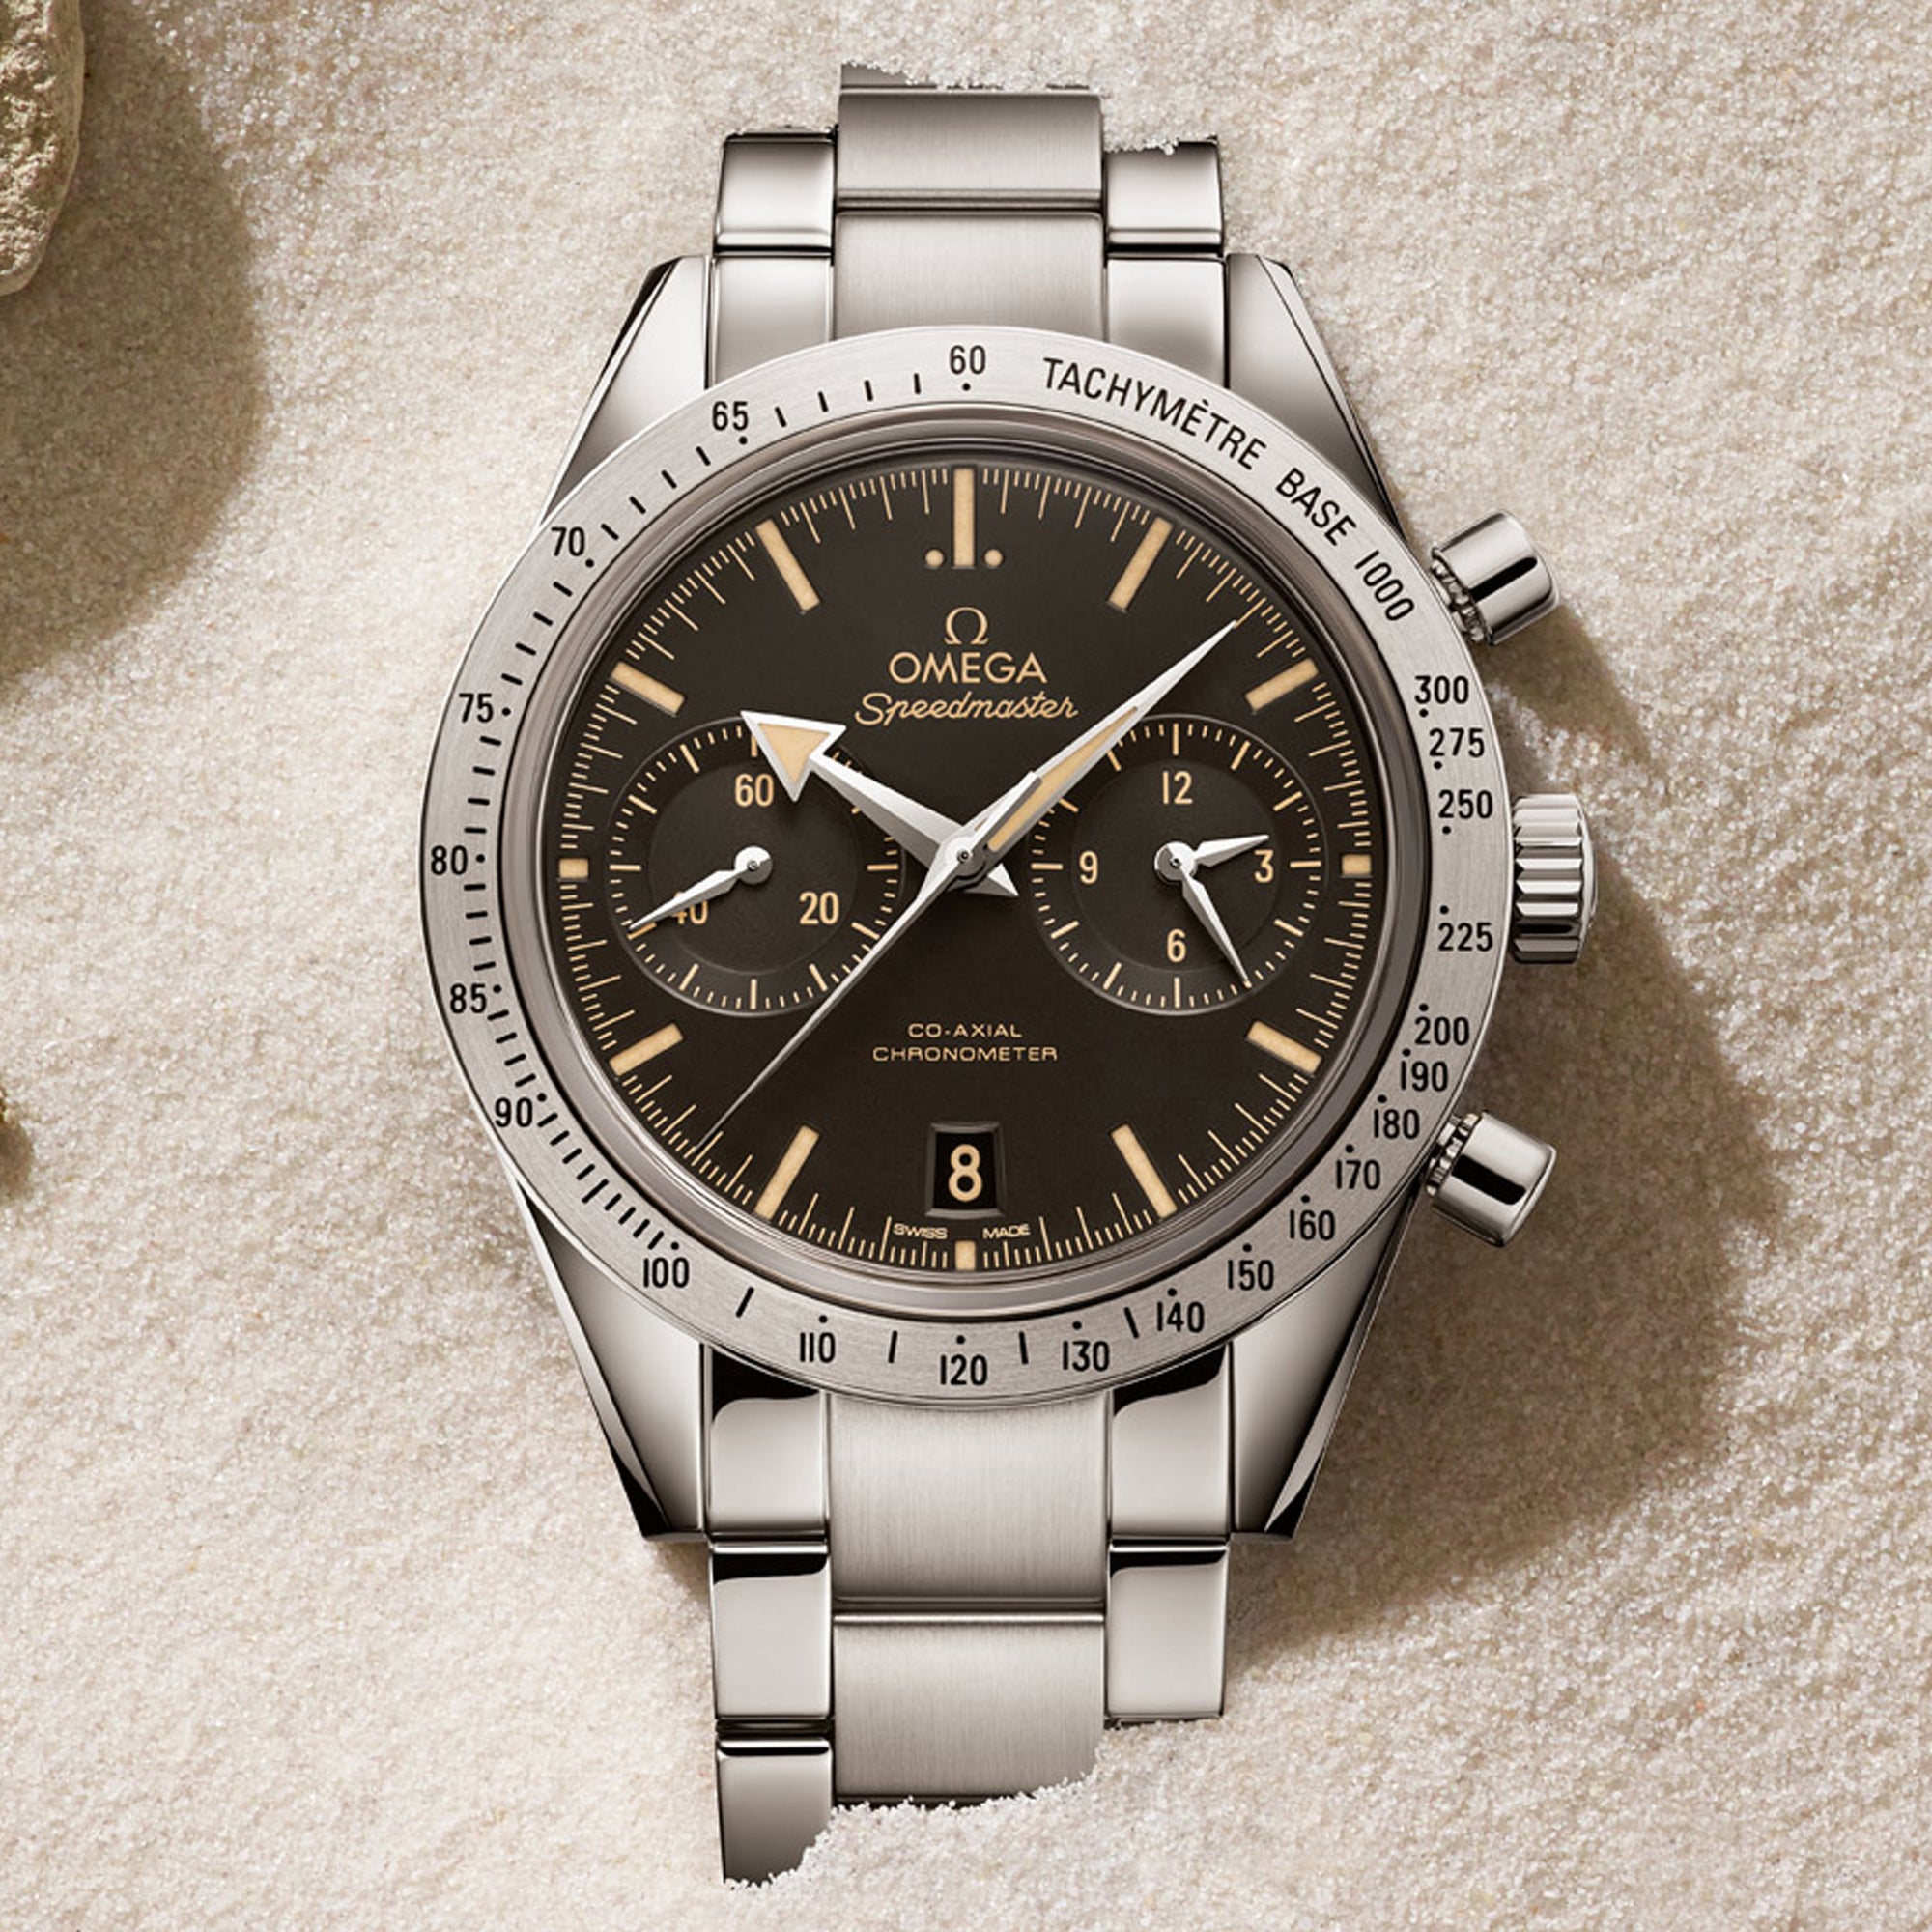 The Omega Speedmaster Celebrates its 60th Year in Style